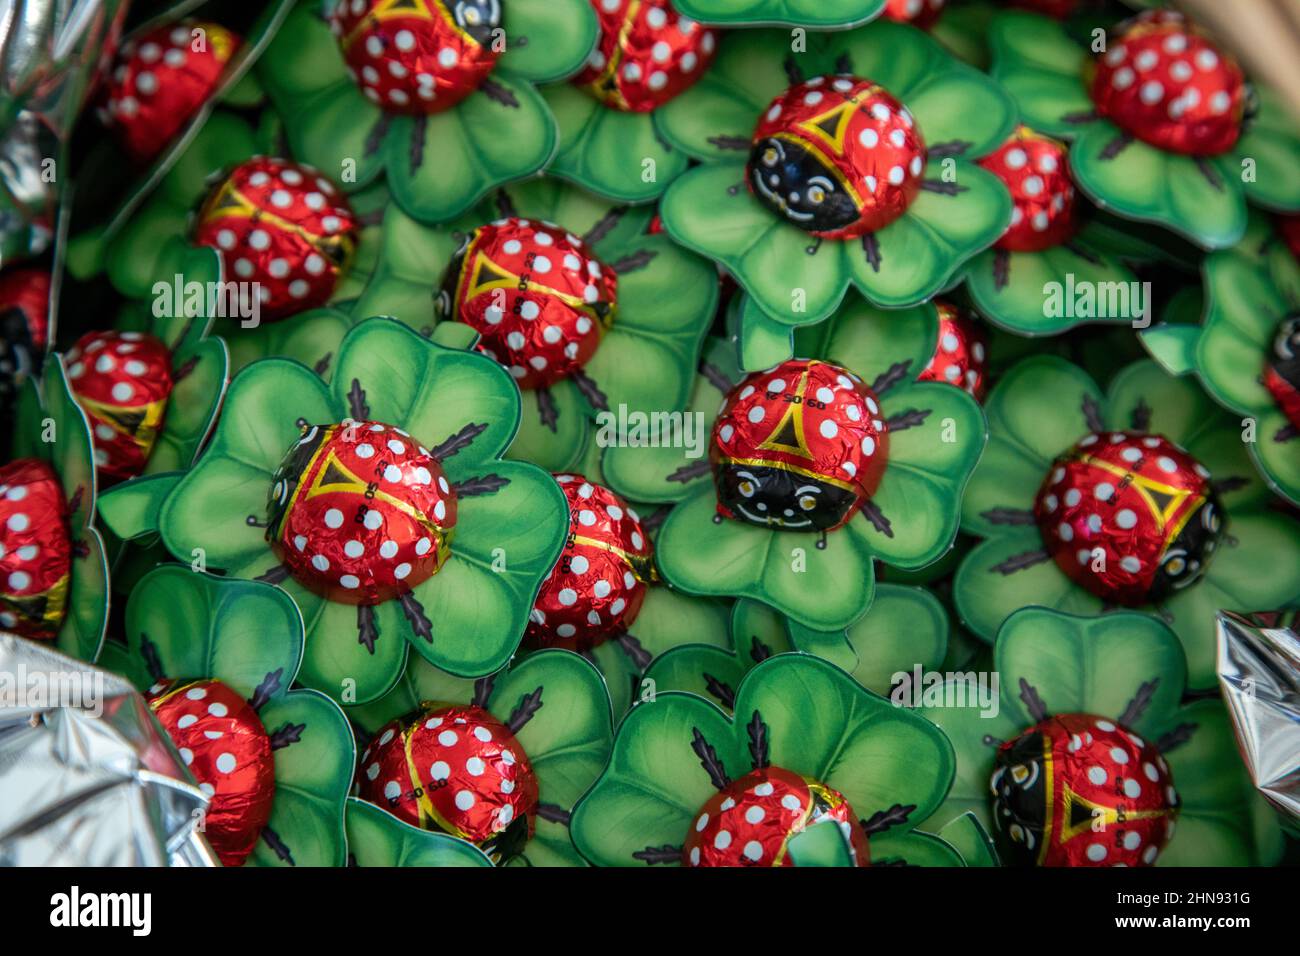 A basket full of lucky chocolate ladybirds on a four leaved clover. Stock Photo